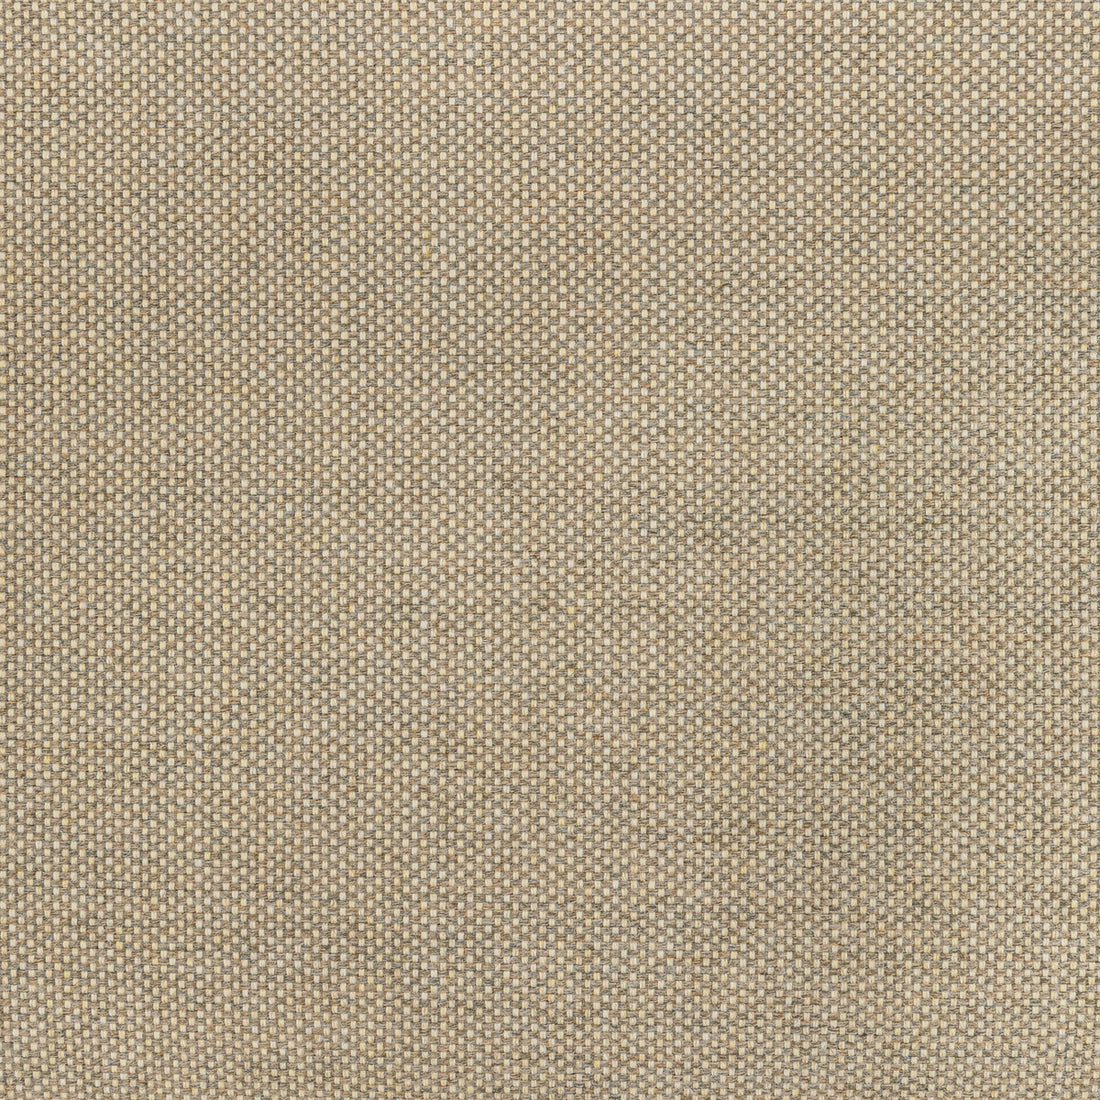 Kravet Basics fabric in 36826-116 color - pattern 36826.116.0 - by Kravet Basics in the Indoor / Outdoor collection